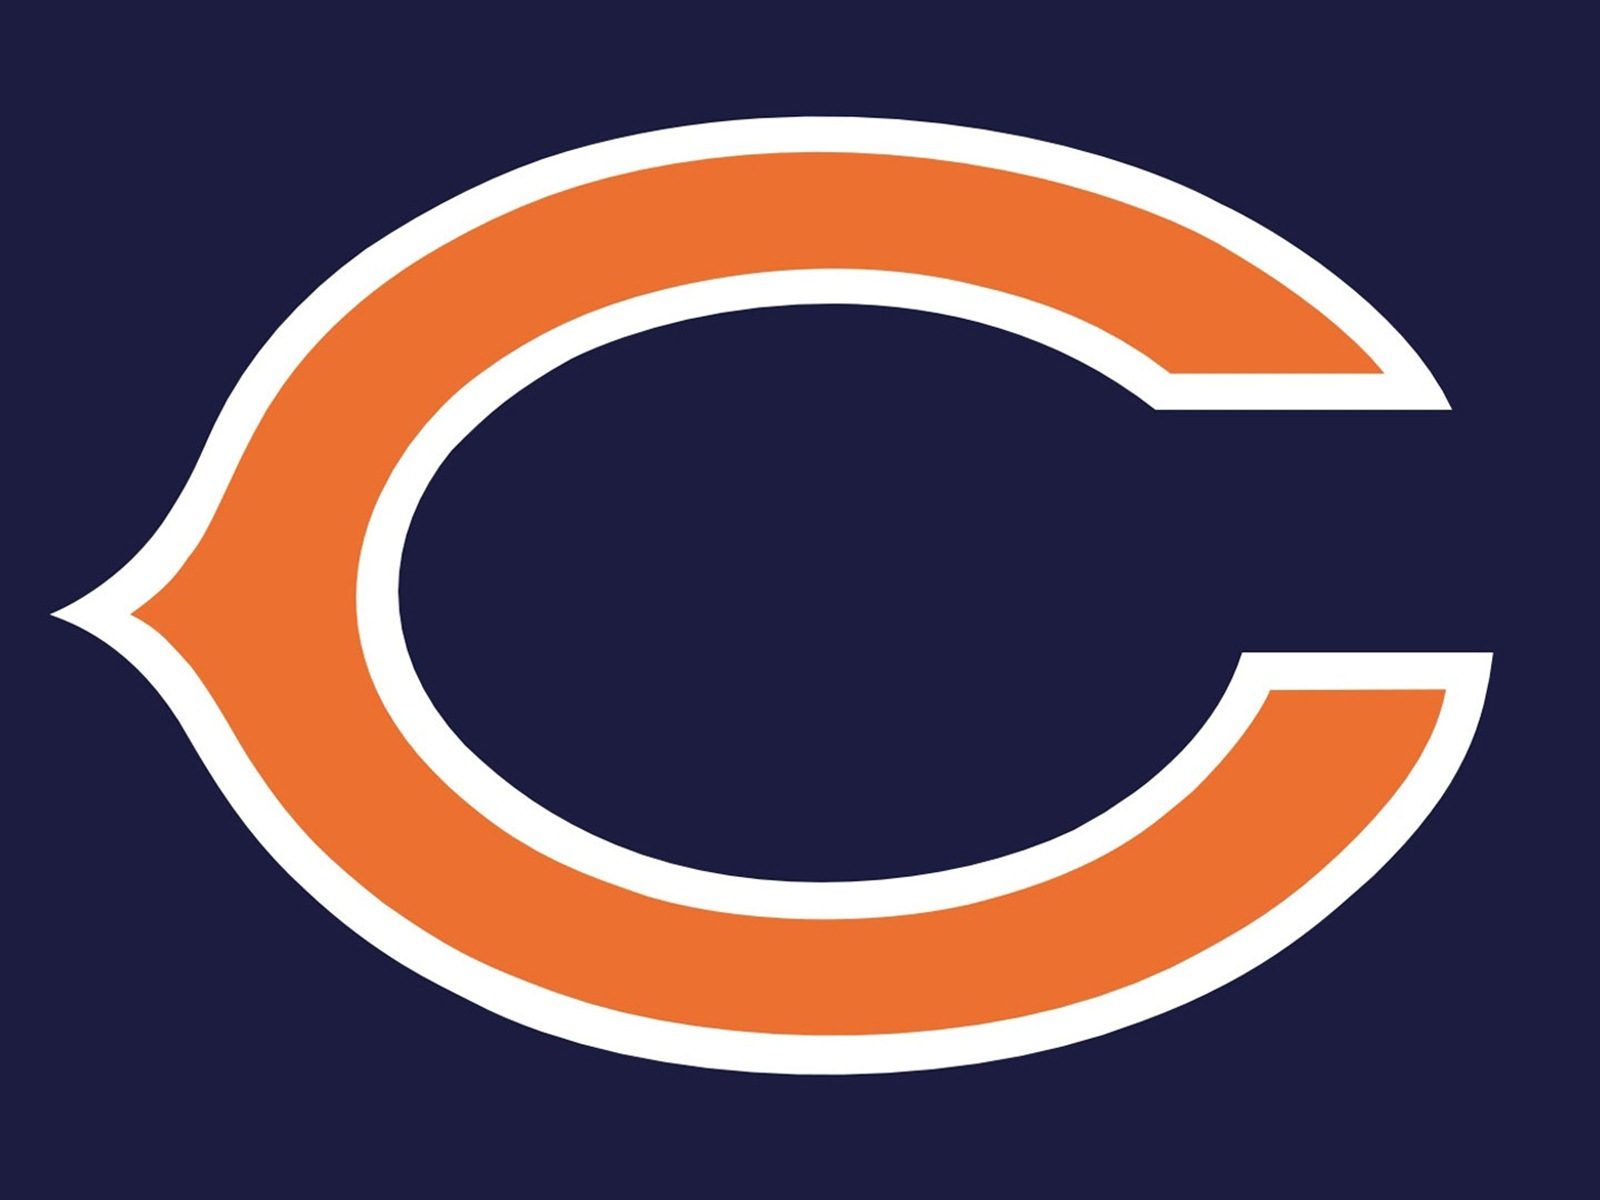 Chicago Bears trade Dick Butkus fires shot at Detroit Lions Justin Fields expected to play Justin Fields says Bears should have beaten Detroit Lions Cole Kmet throws shade at Aidan Hutchinson Justin Fields throws shade at Detroit Lions